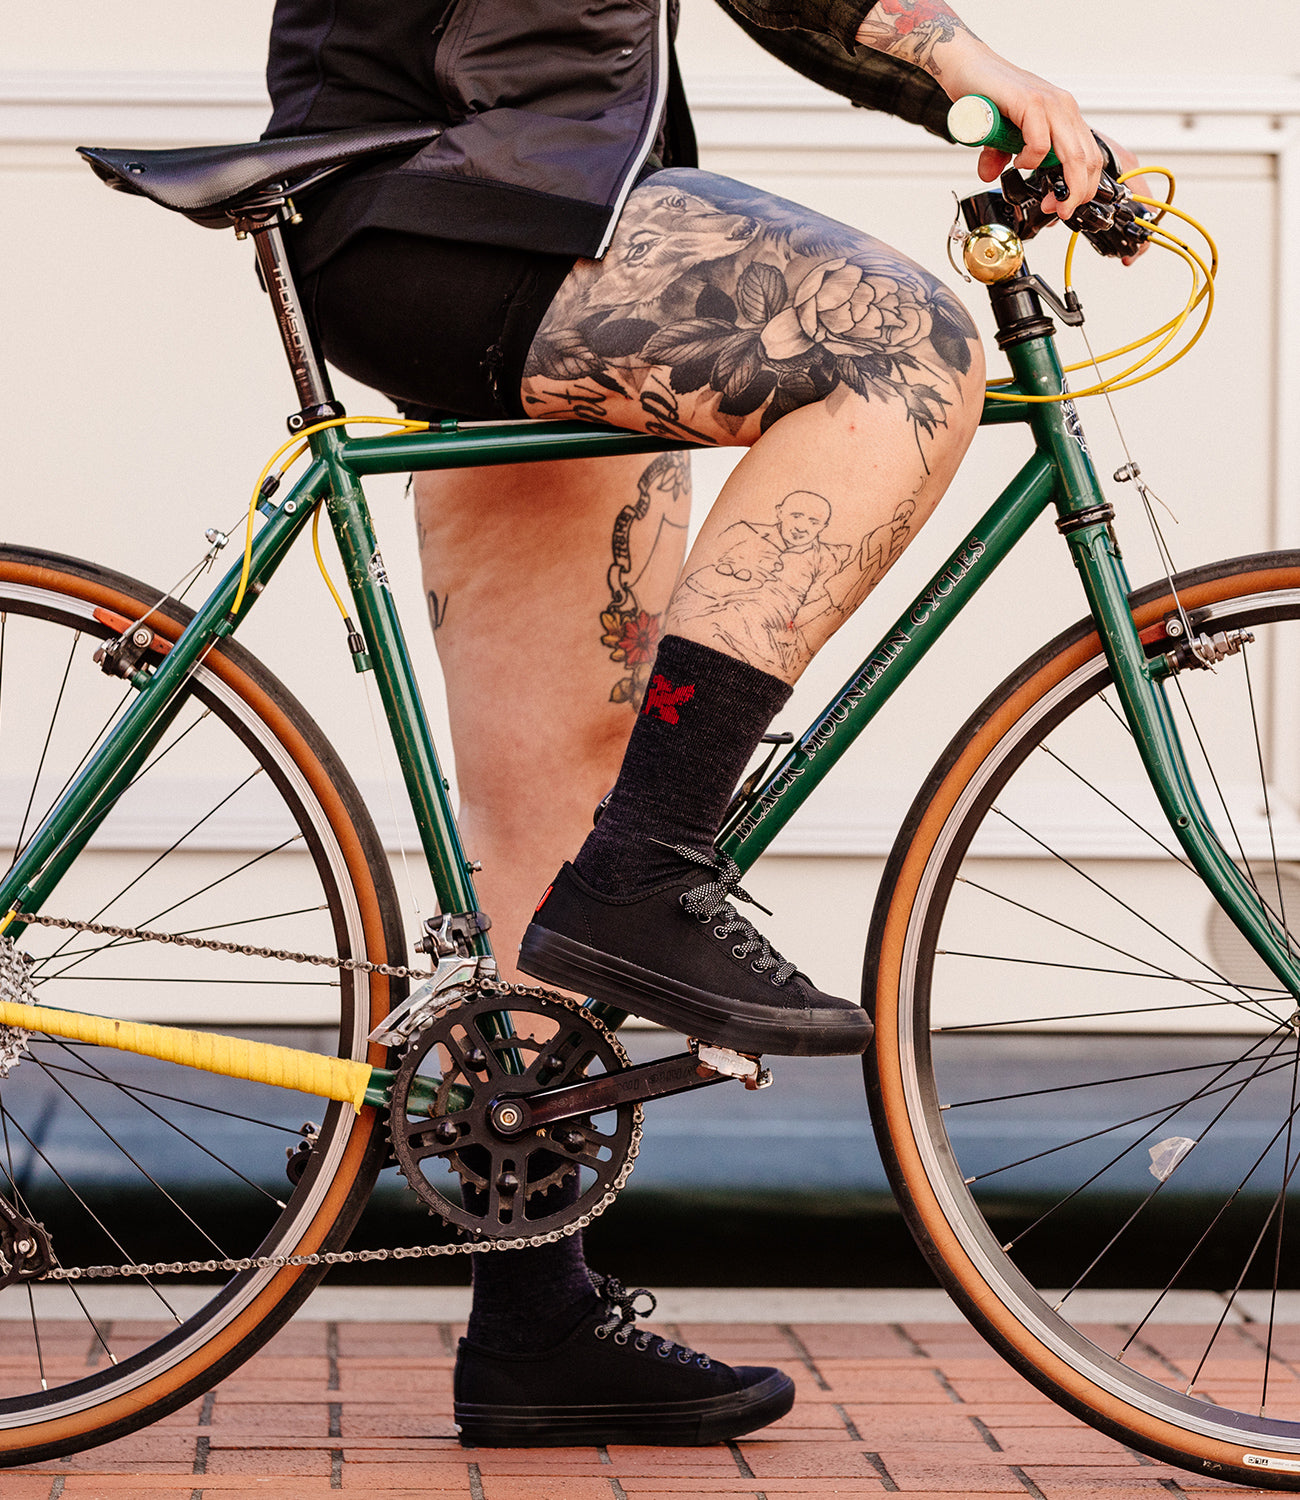 Kursk Pro Bike Shoe being worn by a woman on a bike mobile image size